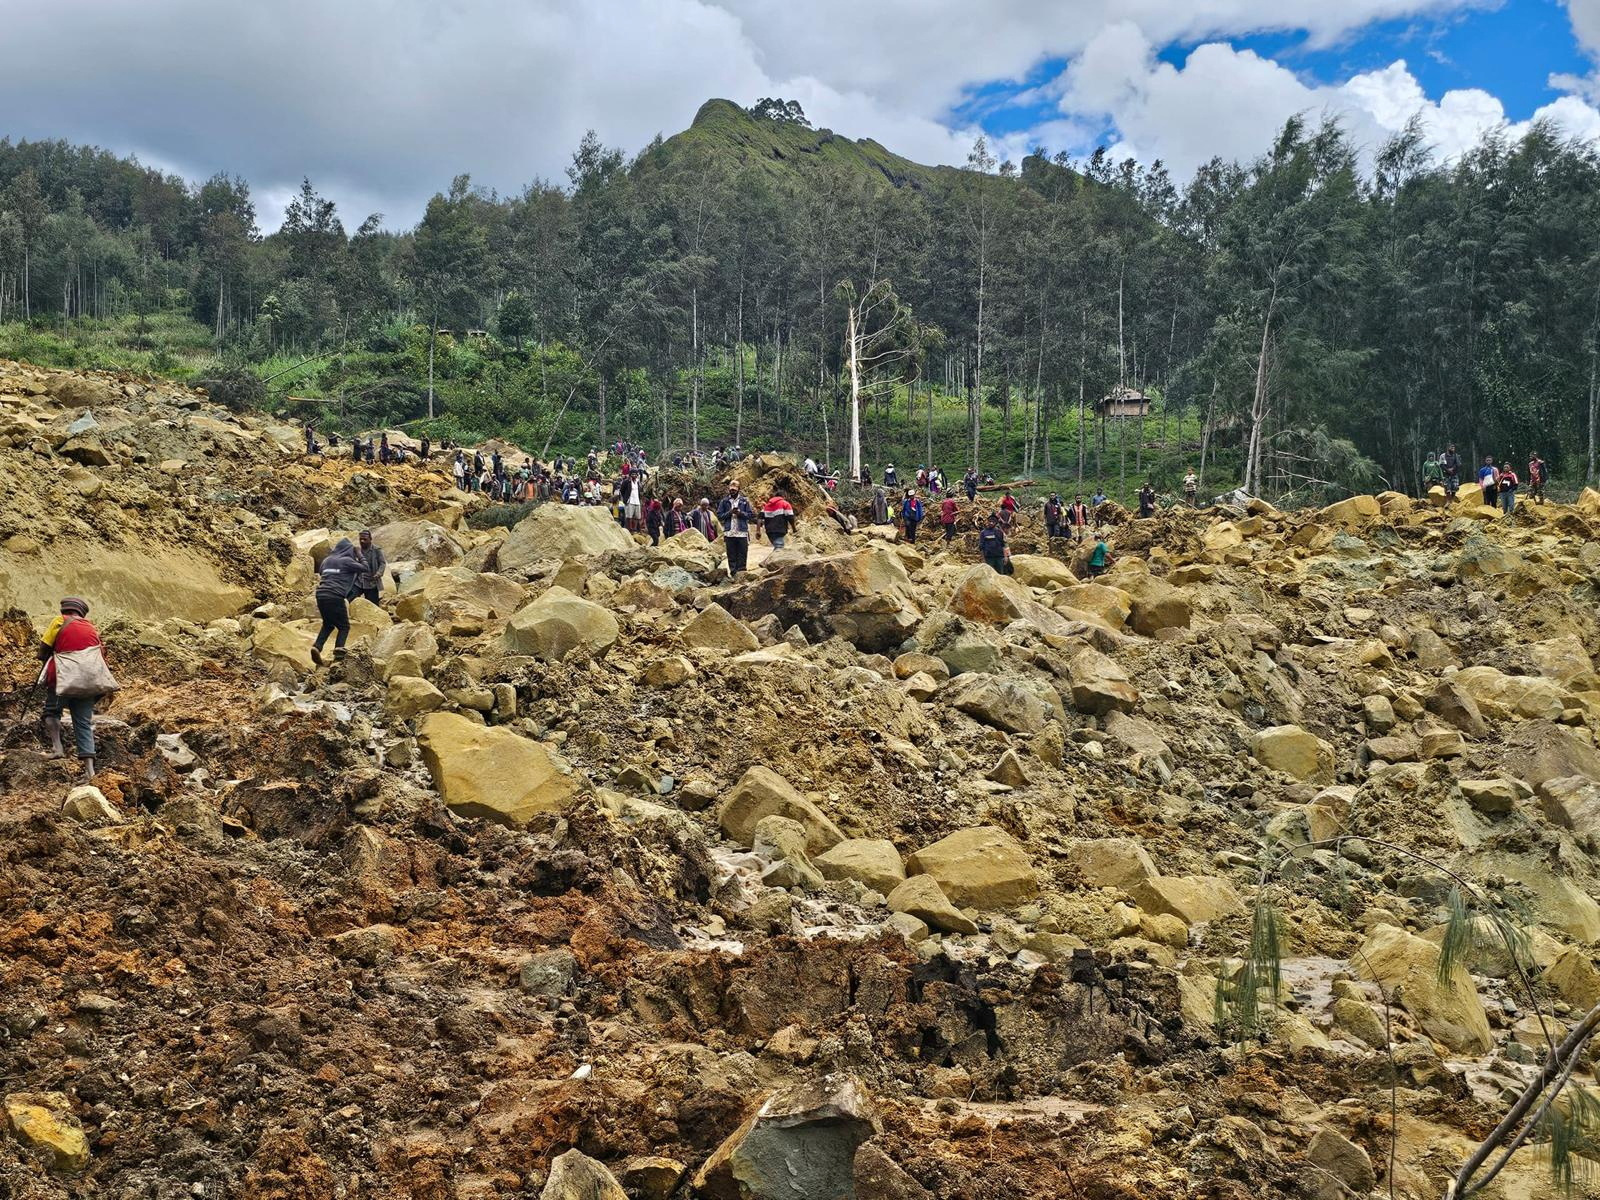 View of the damage after a landslide in Maip Mulitaka